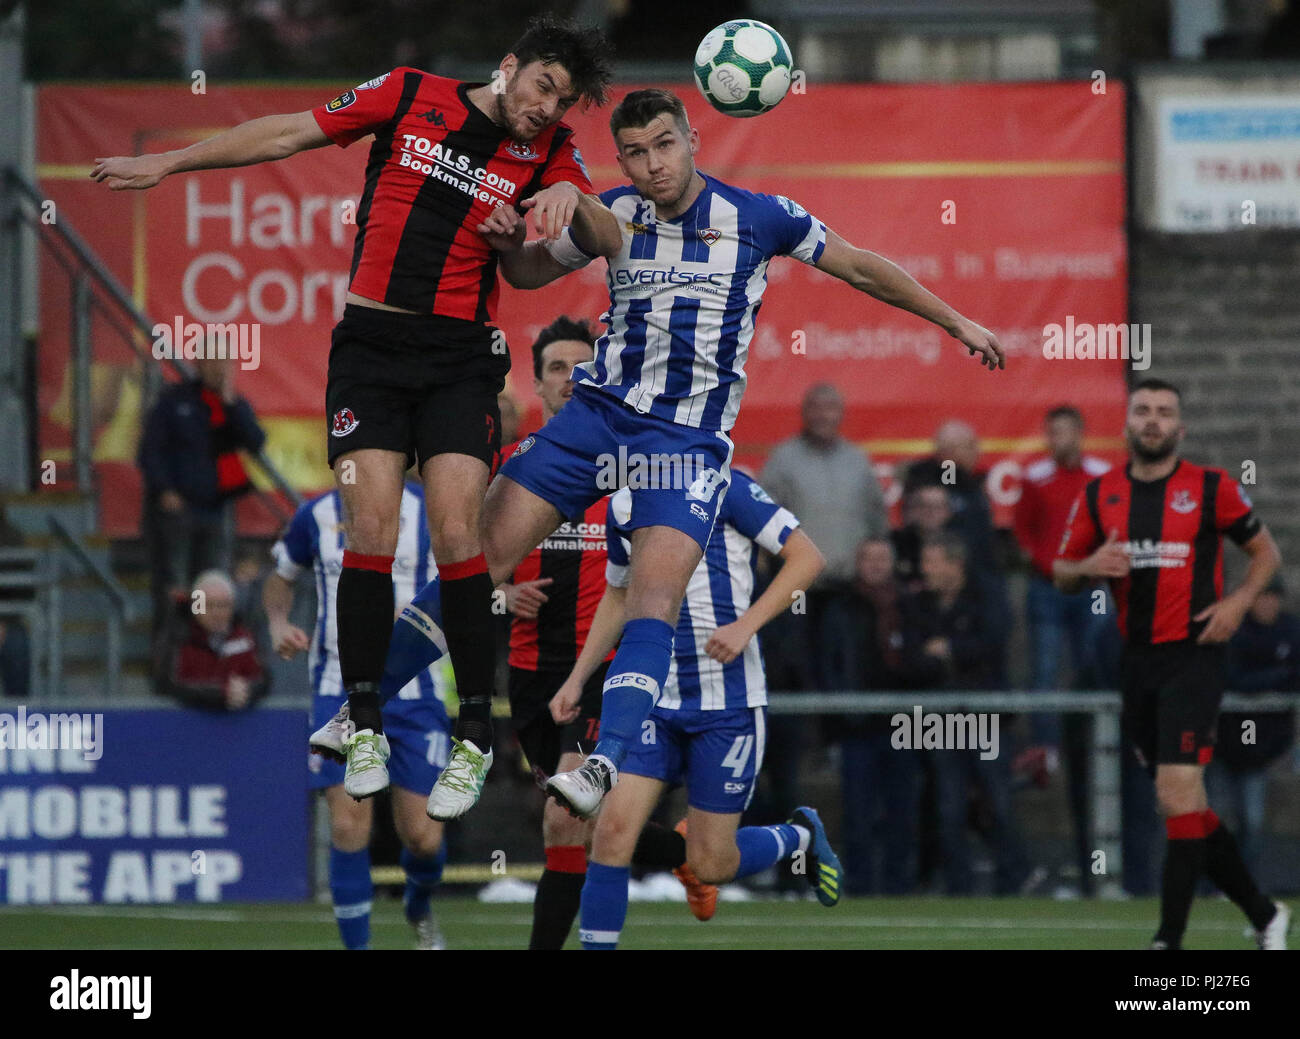 Seaview, Belfast, Northern Ireland.03 September 2018. Danske Bank Premiership - Crusaders v Coleraine. Action from tonight's game at Seaview. The Lowry brothers in action - Philip (left - Crusaders) and Stephen (Coleraine) Credit: David Hunter/Alamy Live News. Stock Photo